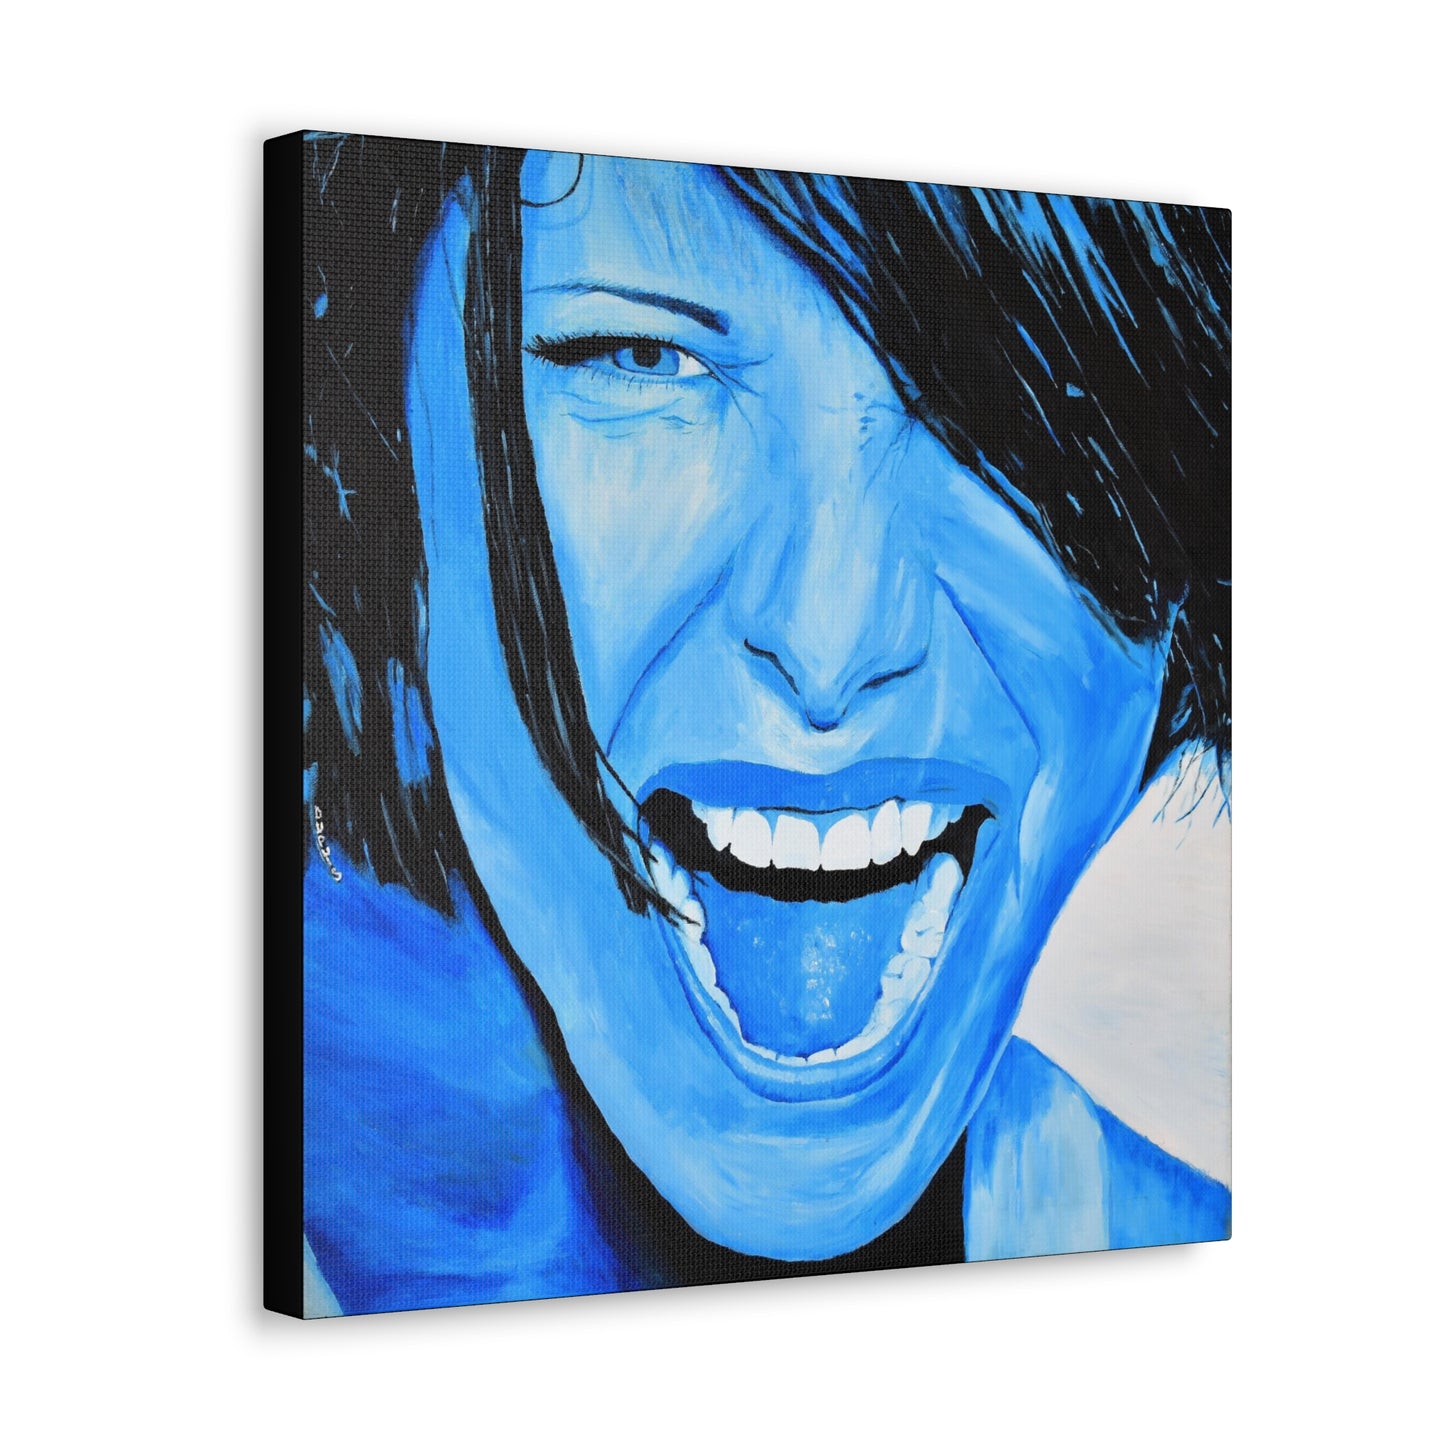 An angled view of a bright blue art print on canvas of a passionate woman showing emotions, woman portrait art